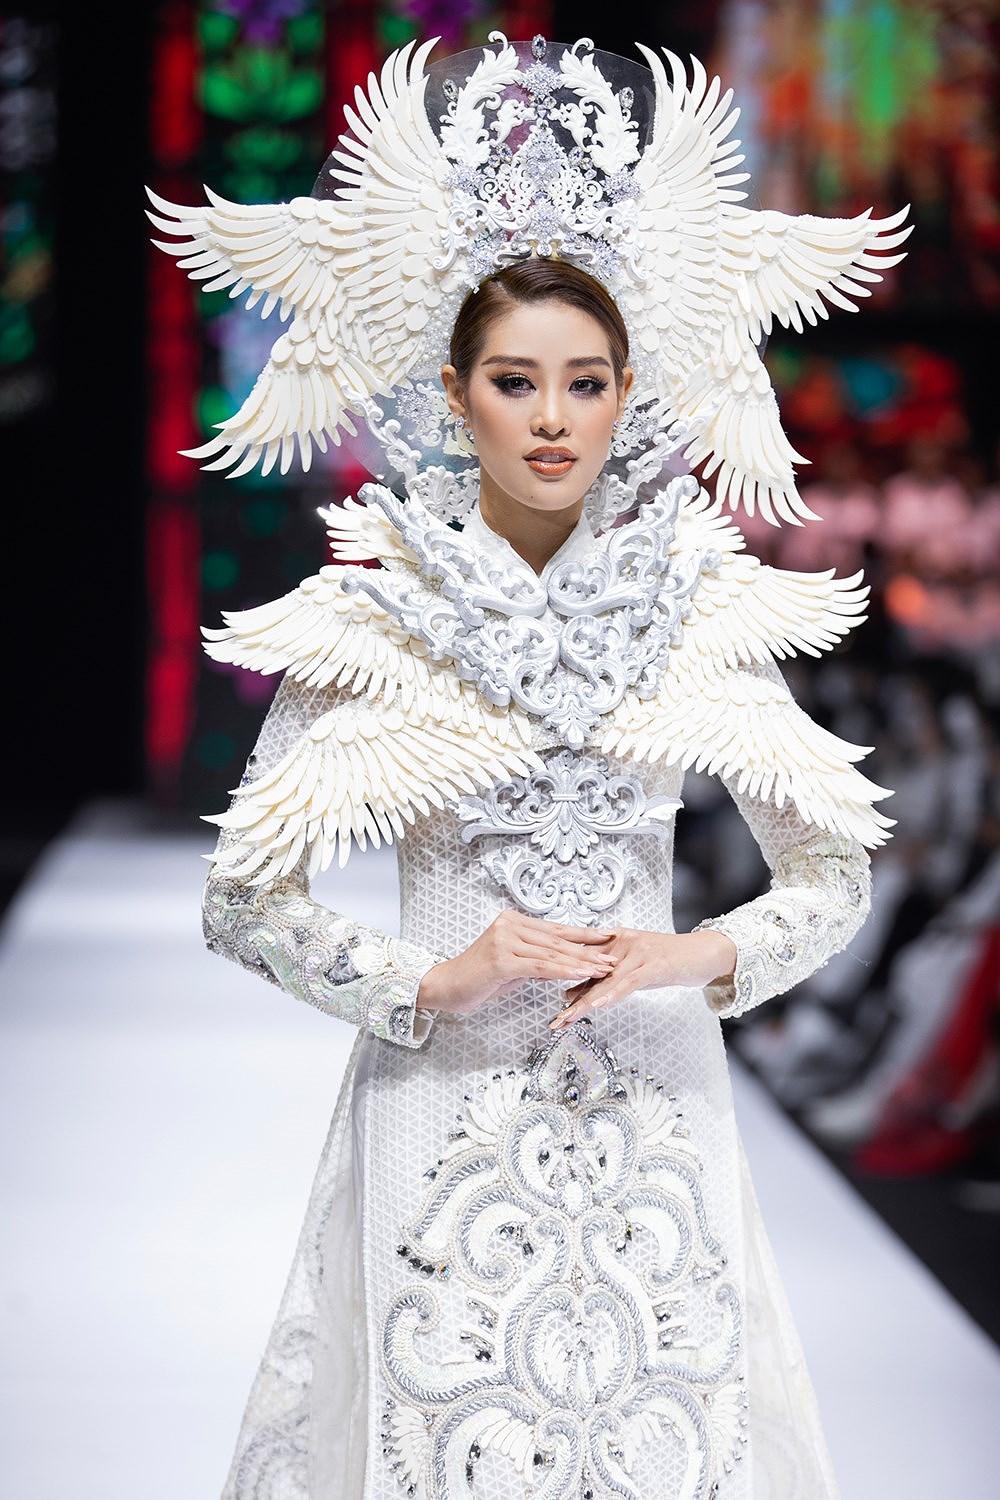 Kim Lang - une collection d'ao dai brodee a la main delicate et impressionnante hinh anh 5